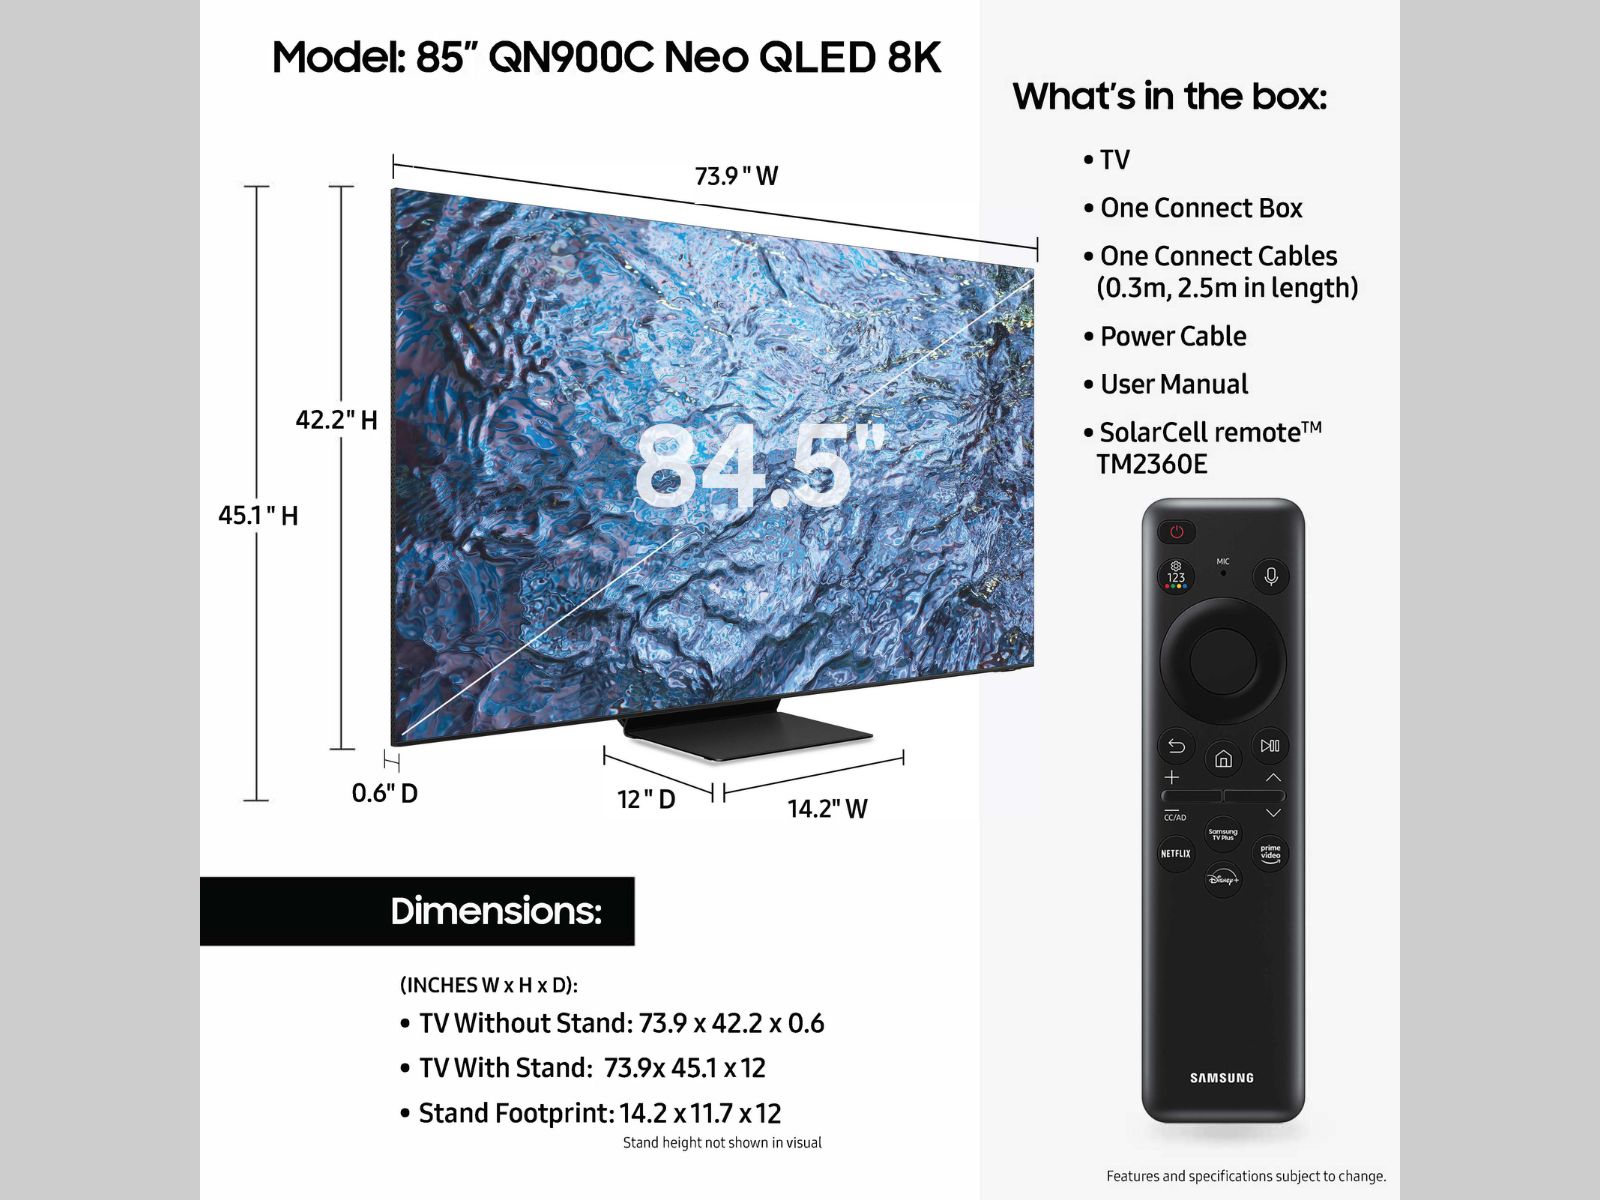 Does anyone actually want to buy an 8K TV?